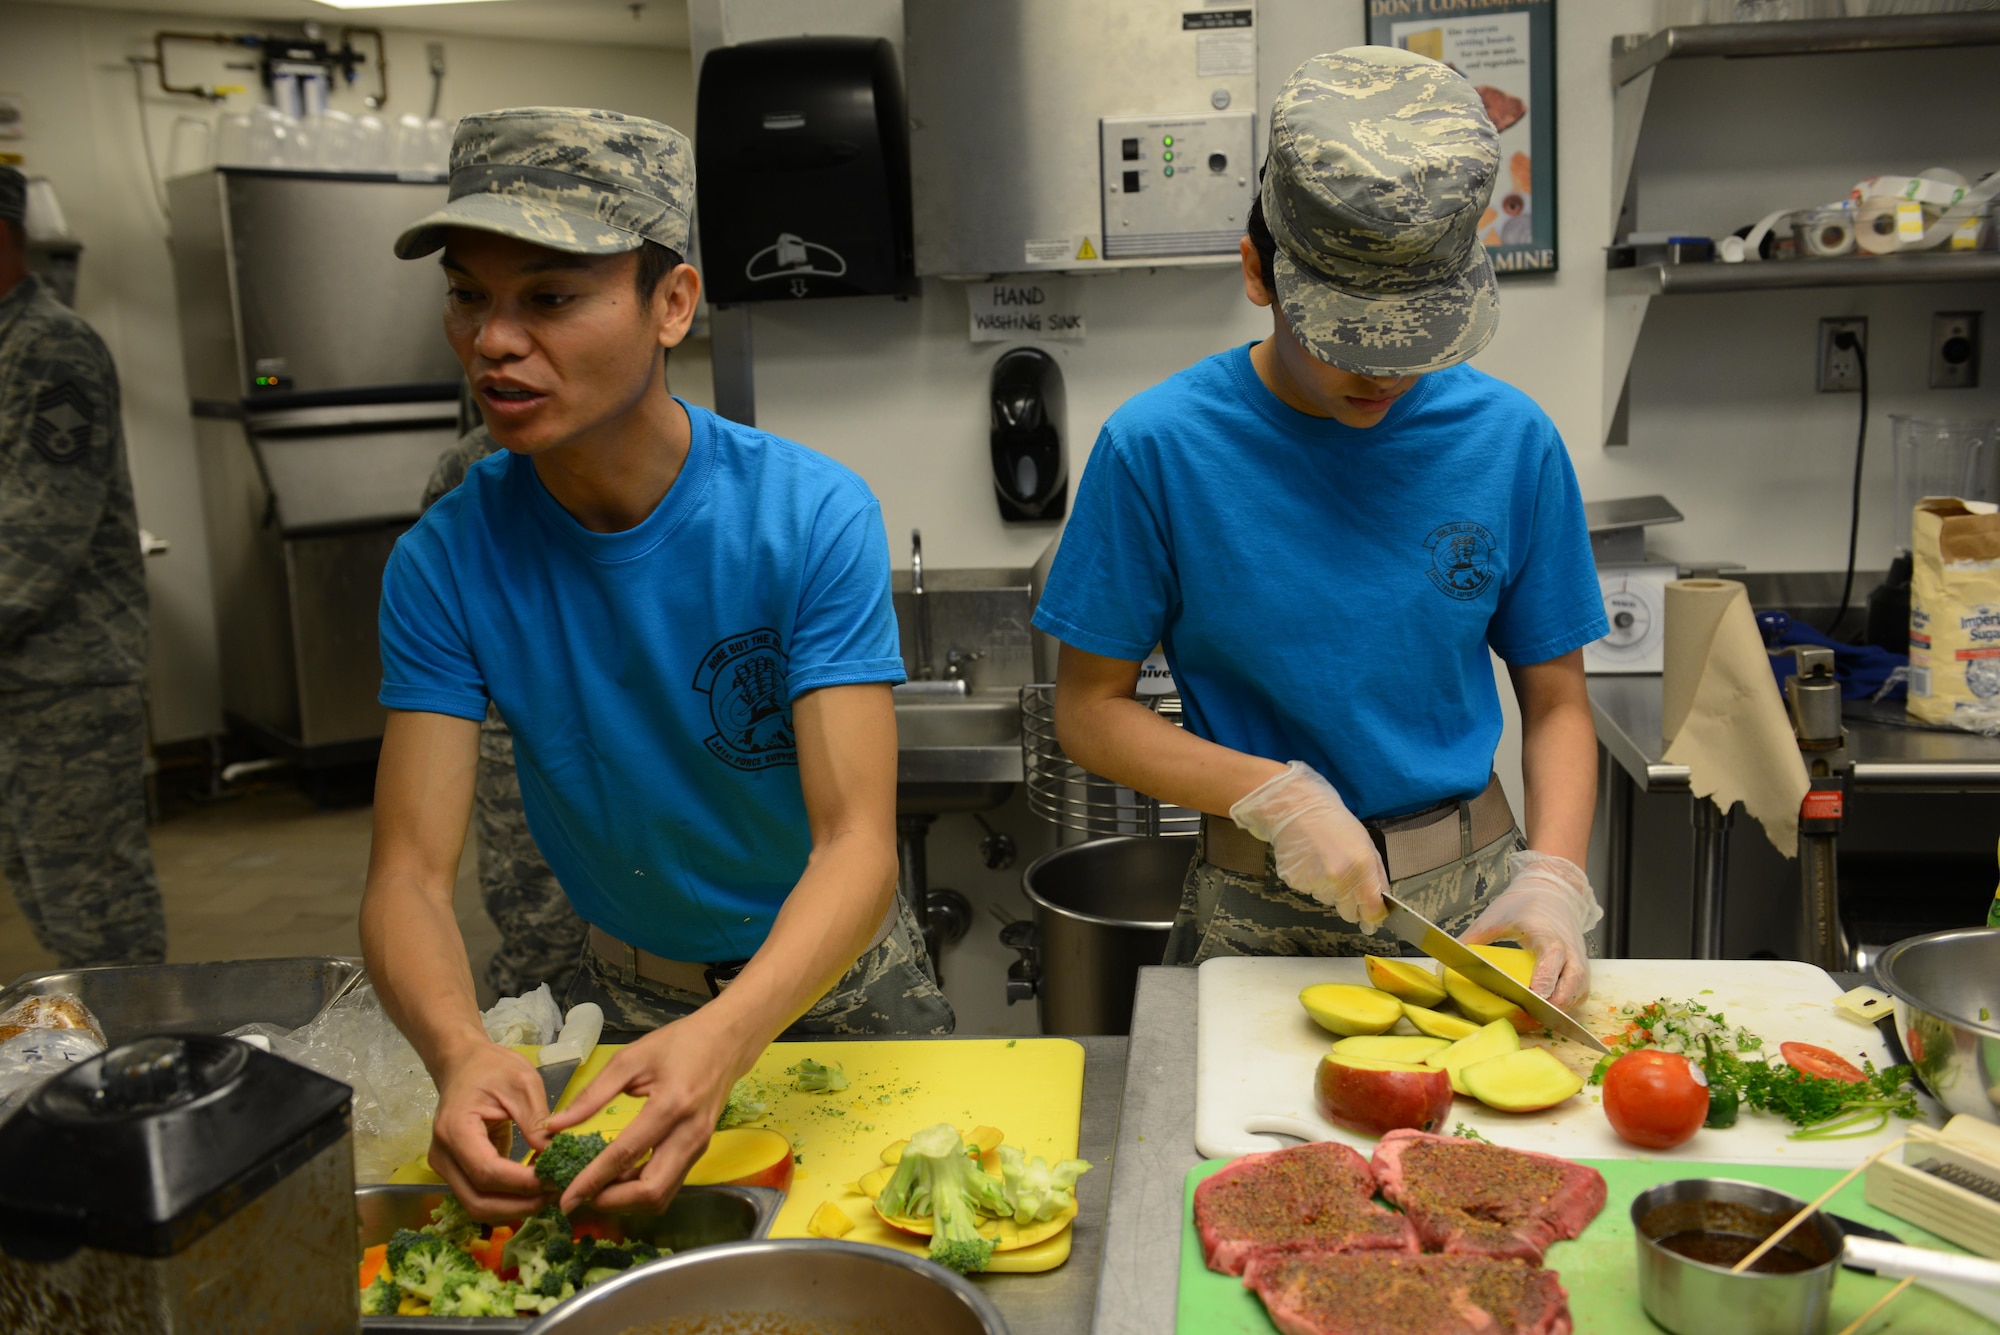 Airman 1st Class Nicki Agunos, 341st Force Support Squadron missile chef, left, checks on his sous chef while he prepares vegetables for sautéing June 7, 2017 at Malmstrom Air Force Base, Mont. Agunos and his partner Staff Sgt. Amber Sansone prepared a surf and turf themed meal complete with salad. (U.S. Air Force photo/Staff Sgt. Delia Marchick)